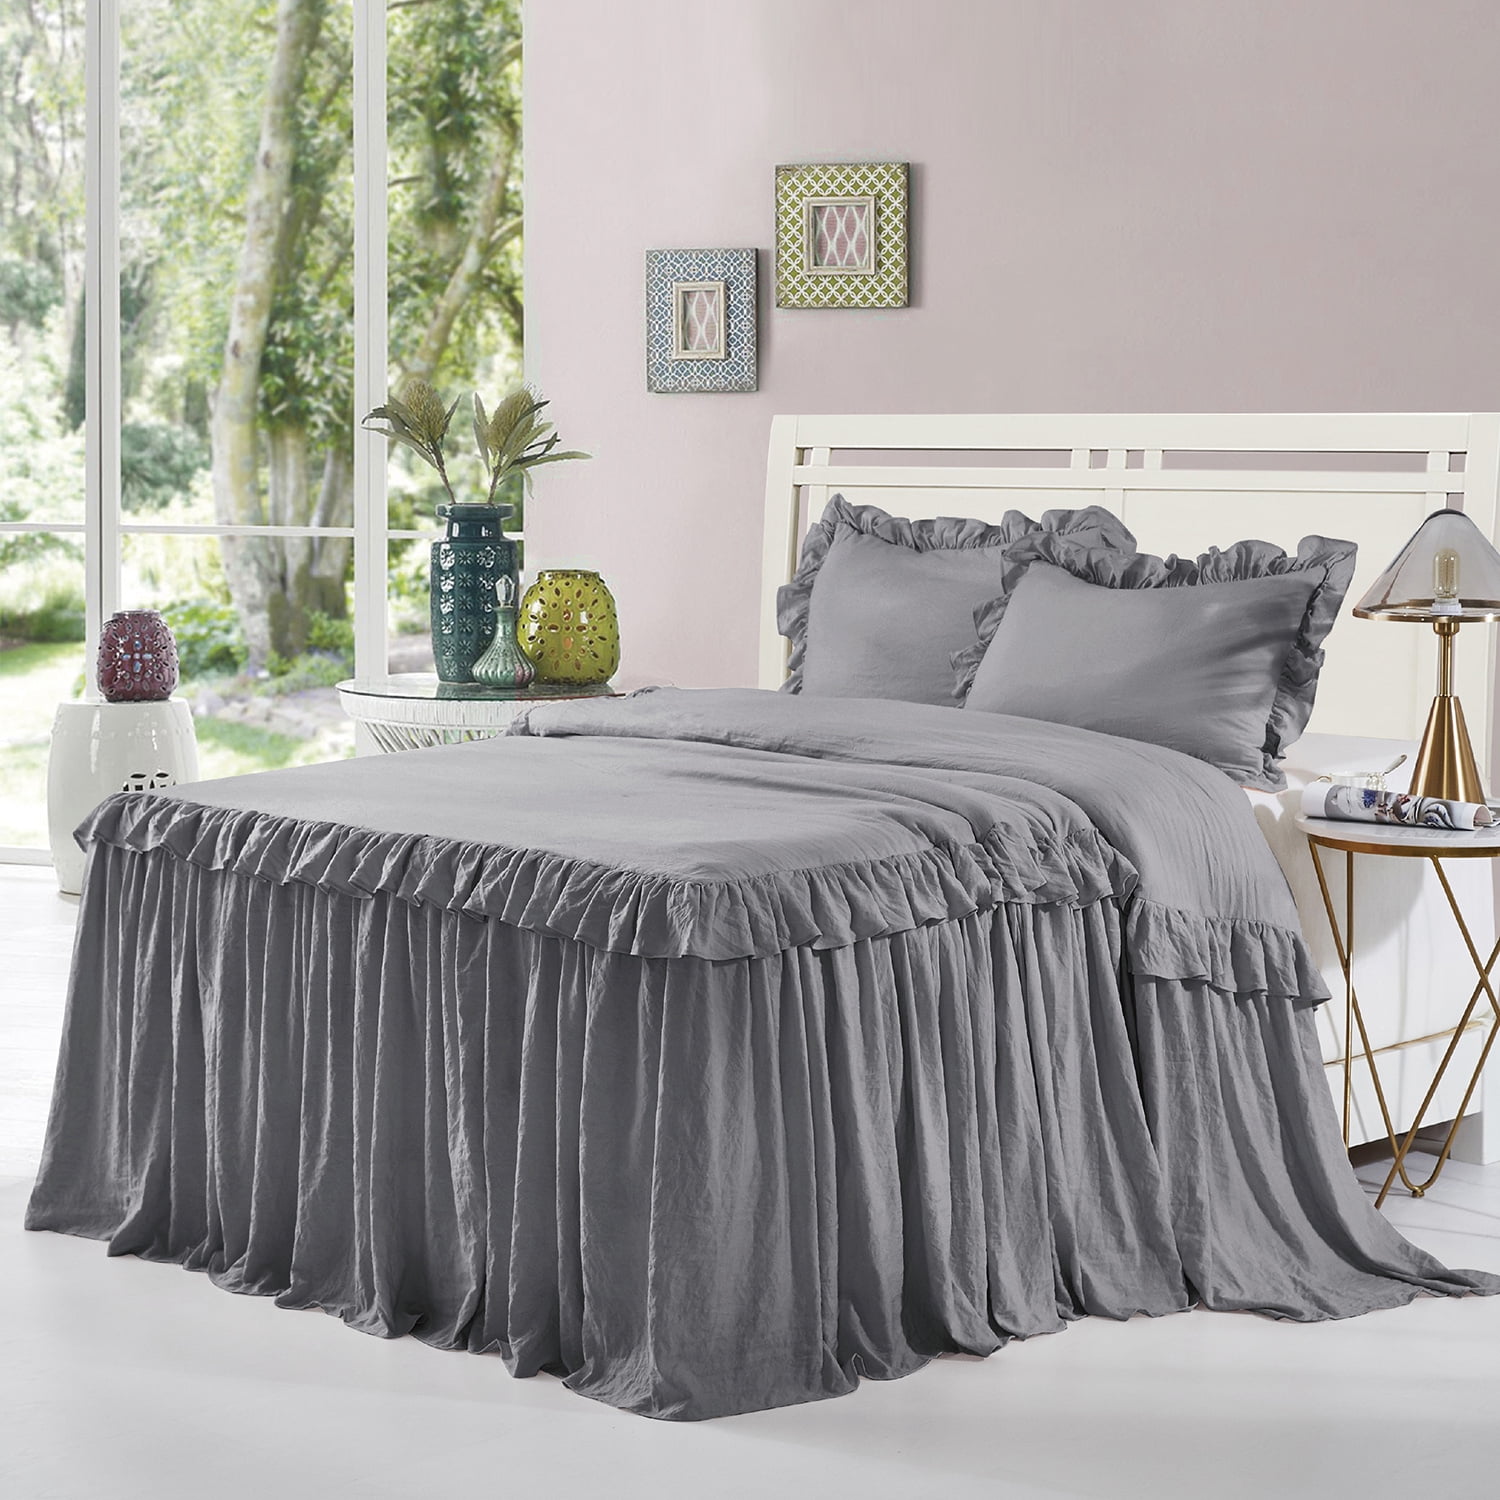 Details about   Bedspread 3 Side Coverage 17 Inch Dust Ruffle Lace Bed Skirt Pillow Shams 3/5Pcs 